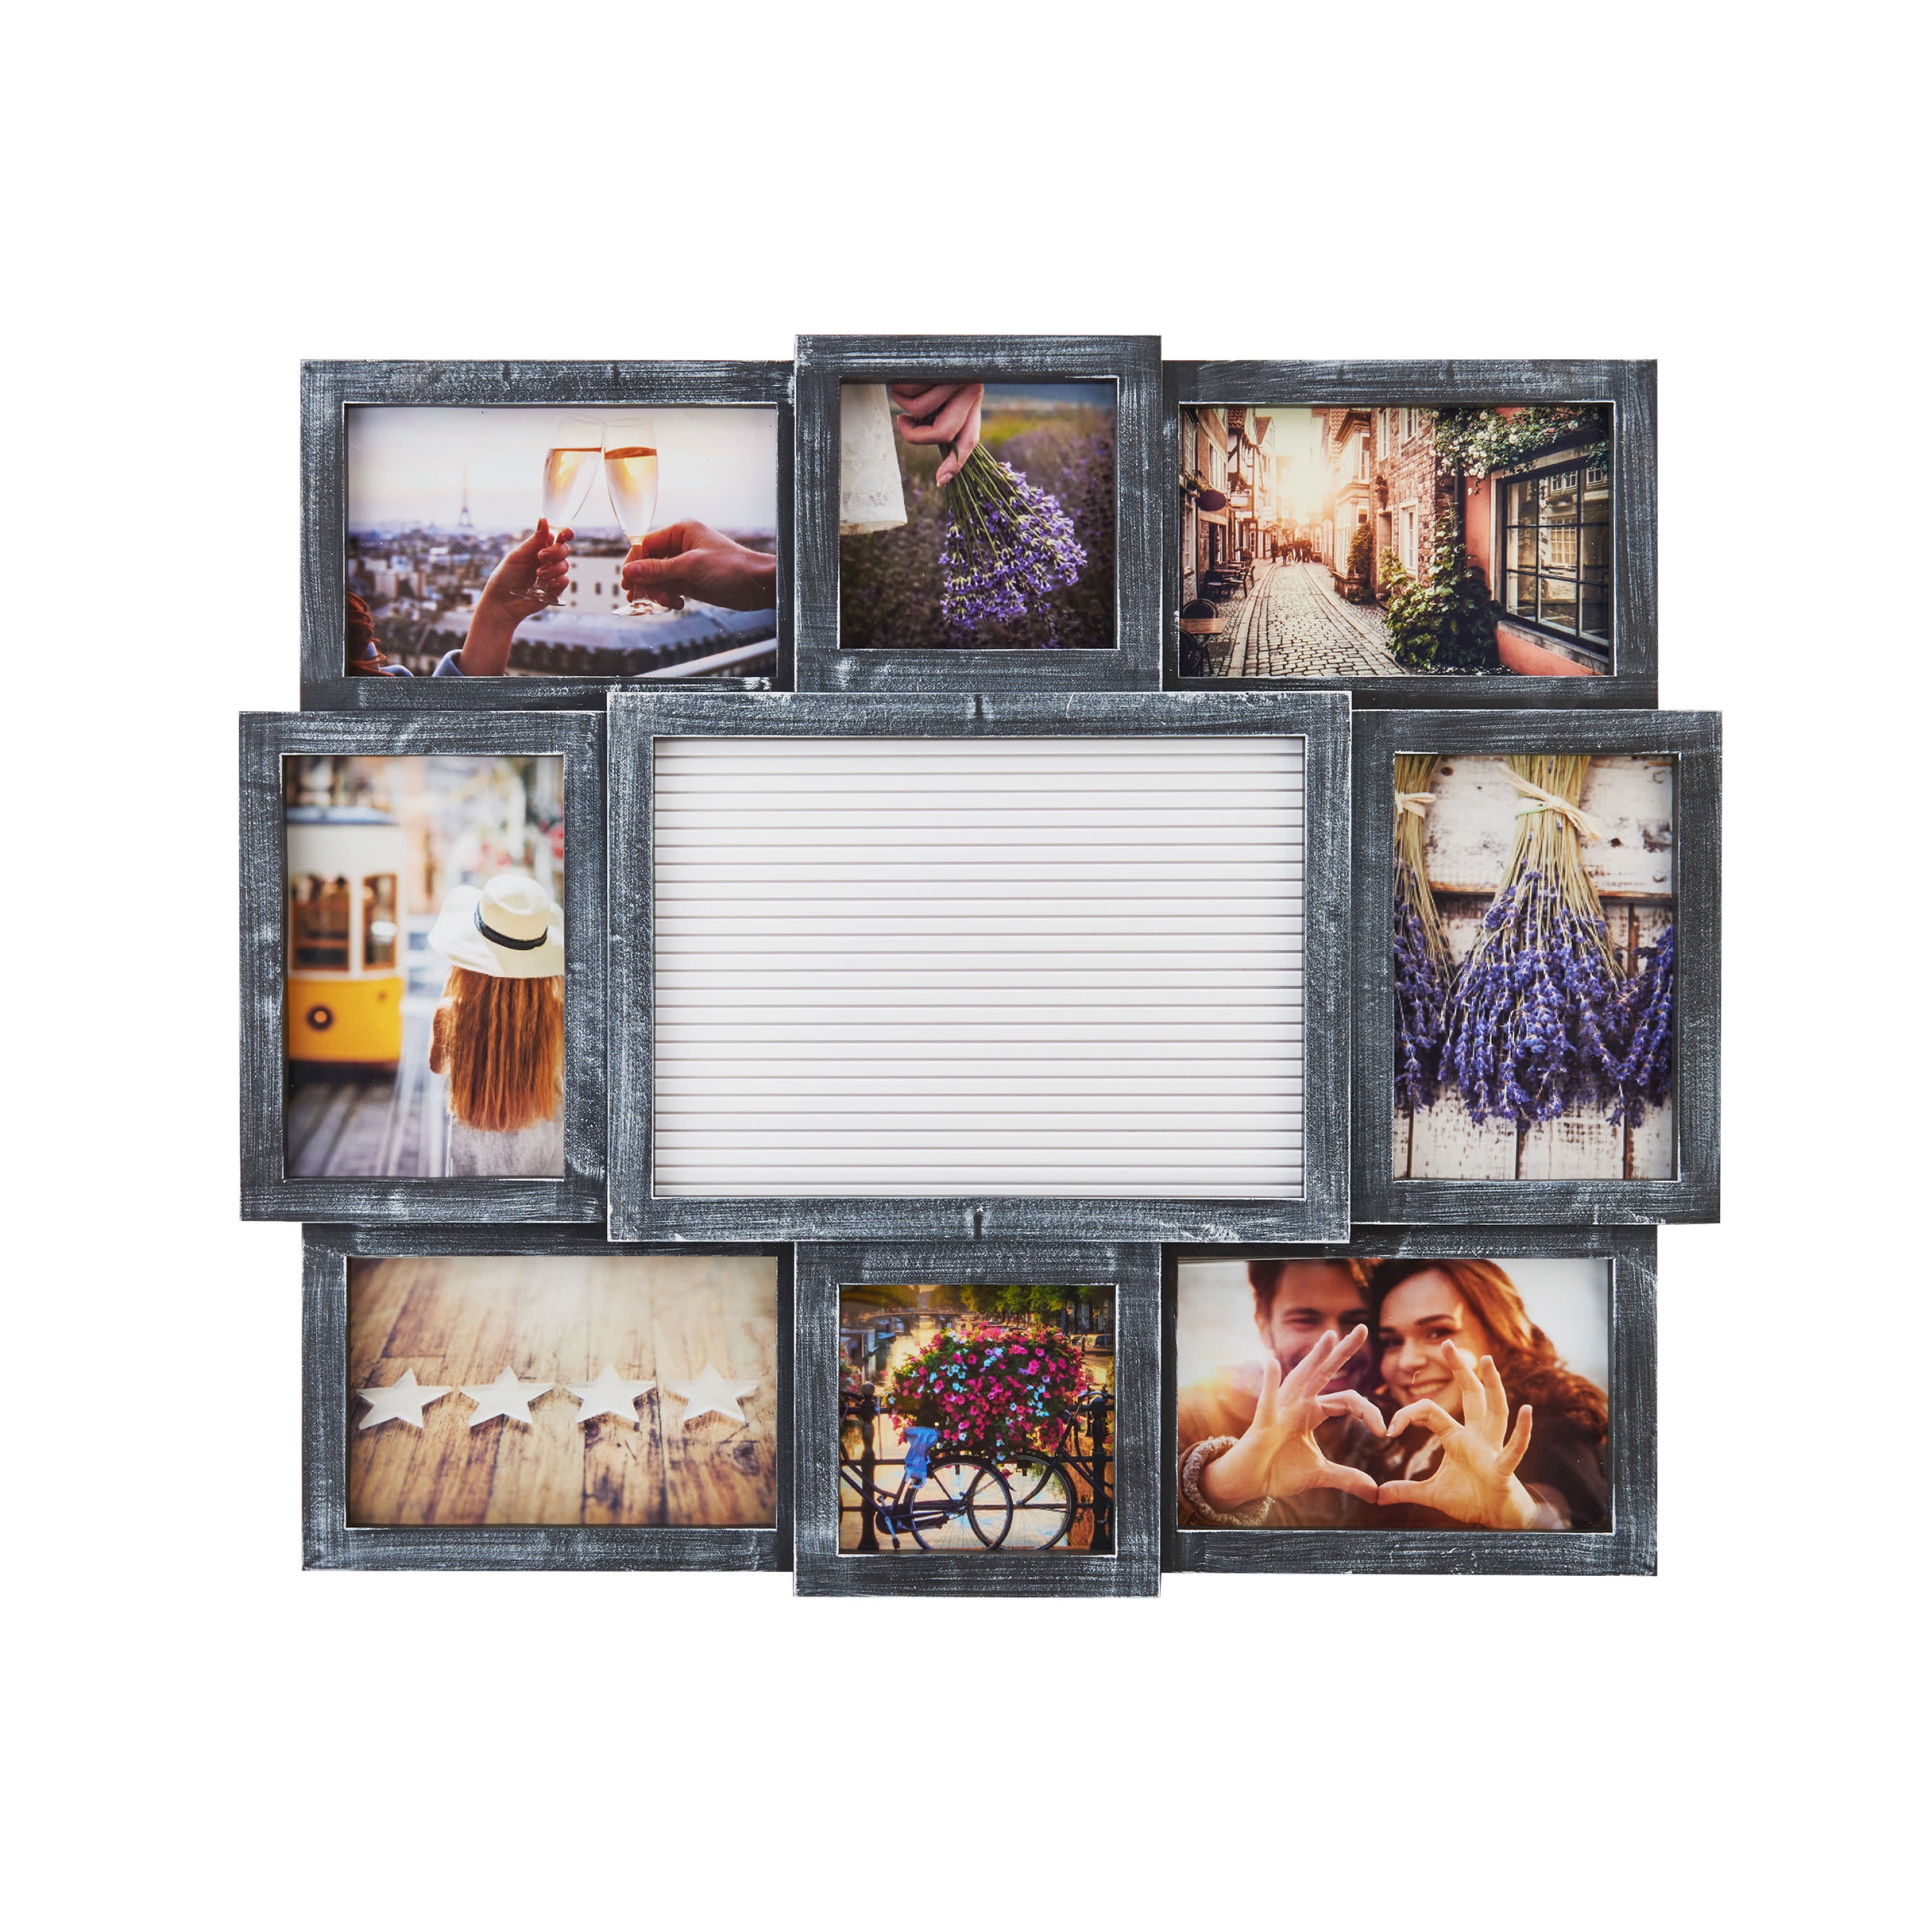 Black 19-Inch-by-17-Inch MELANNCO Customizable Letter Board with 8-Opening Photo Collage 